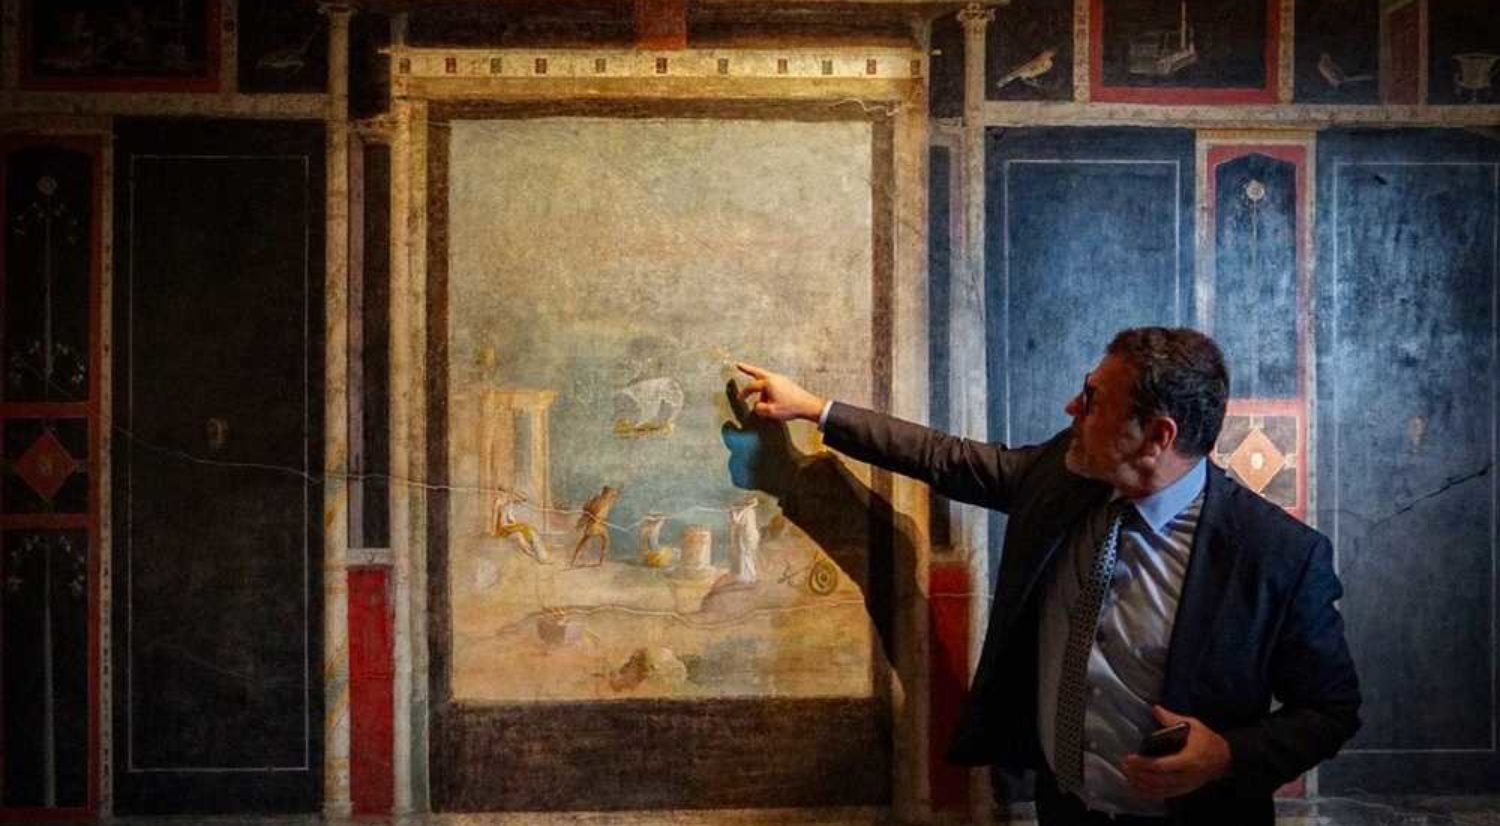 Massimo Osanna, director of the Pompeii Archaeological Park, at the unveiling of one of the painted houses at Pompeii. Courtesy of the Italian Ministry of Culture and Tourism.